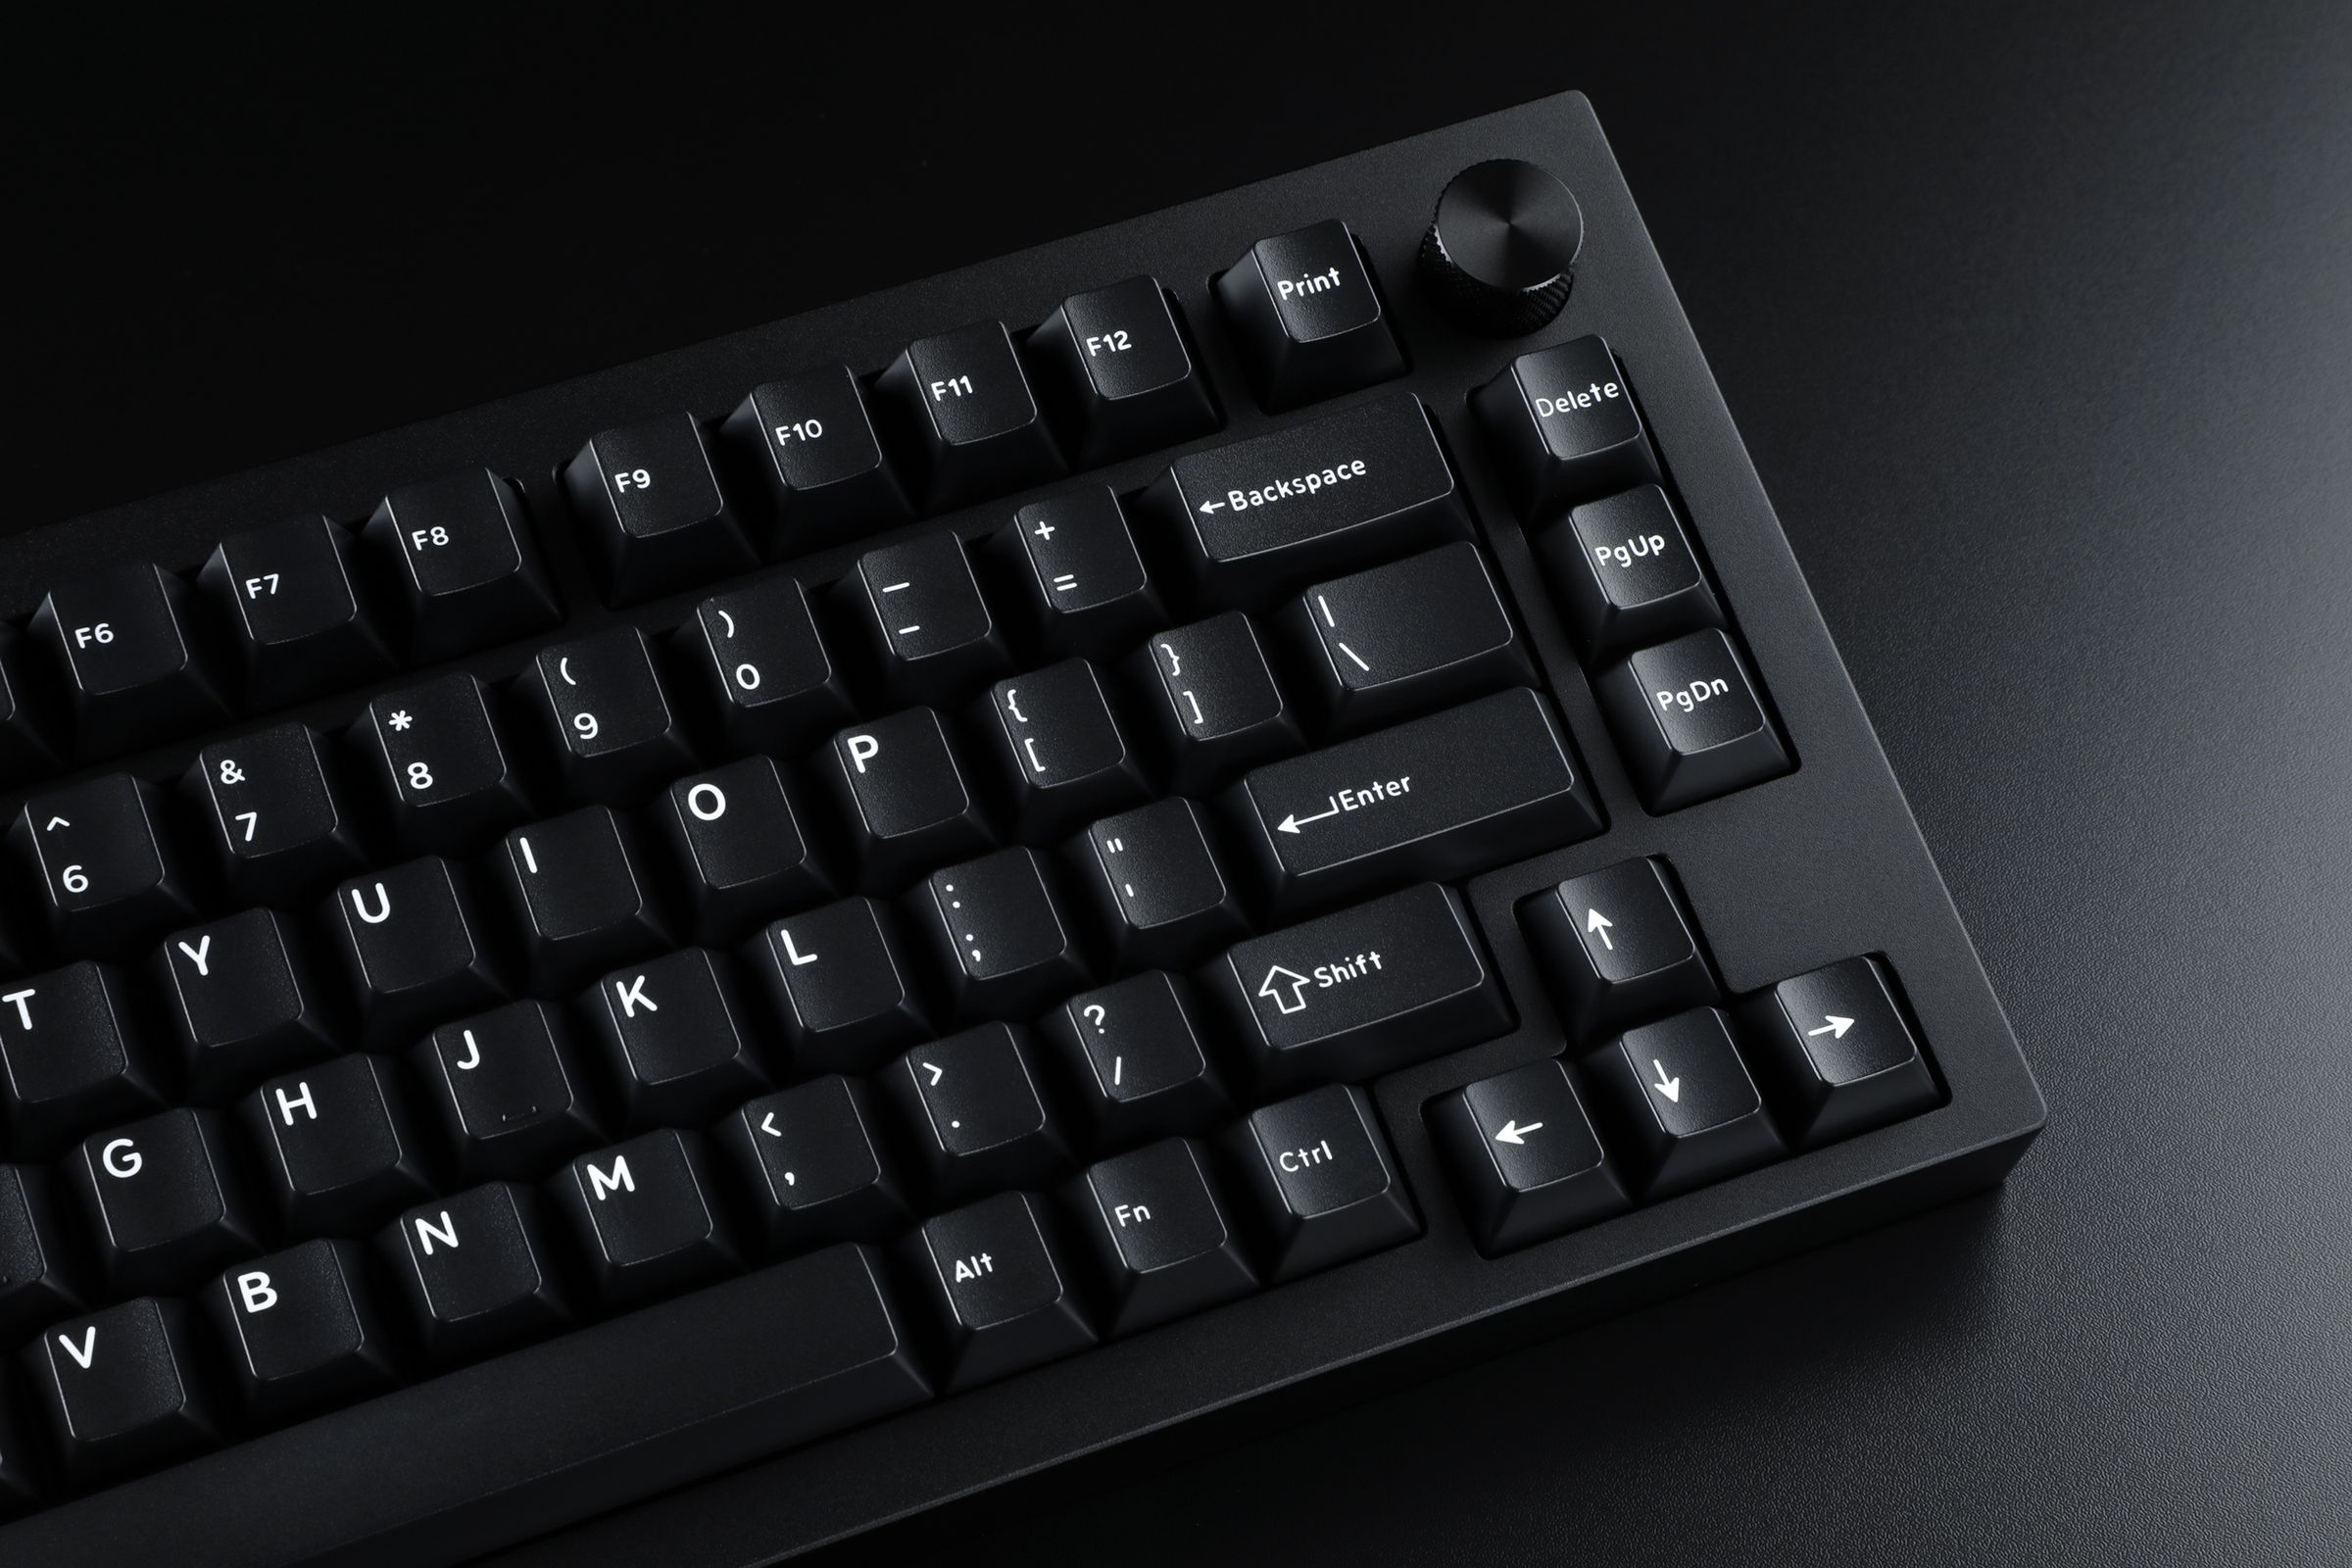 The right-hand side of the Sense75 keyboard from Drop, in all black with white-on-black DCX keycaps.